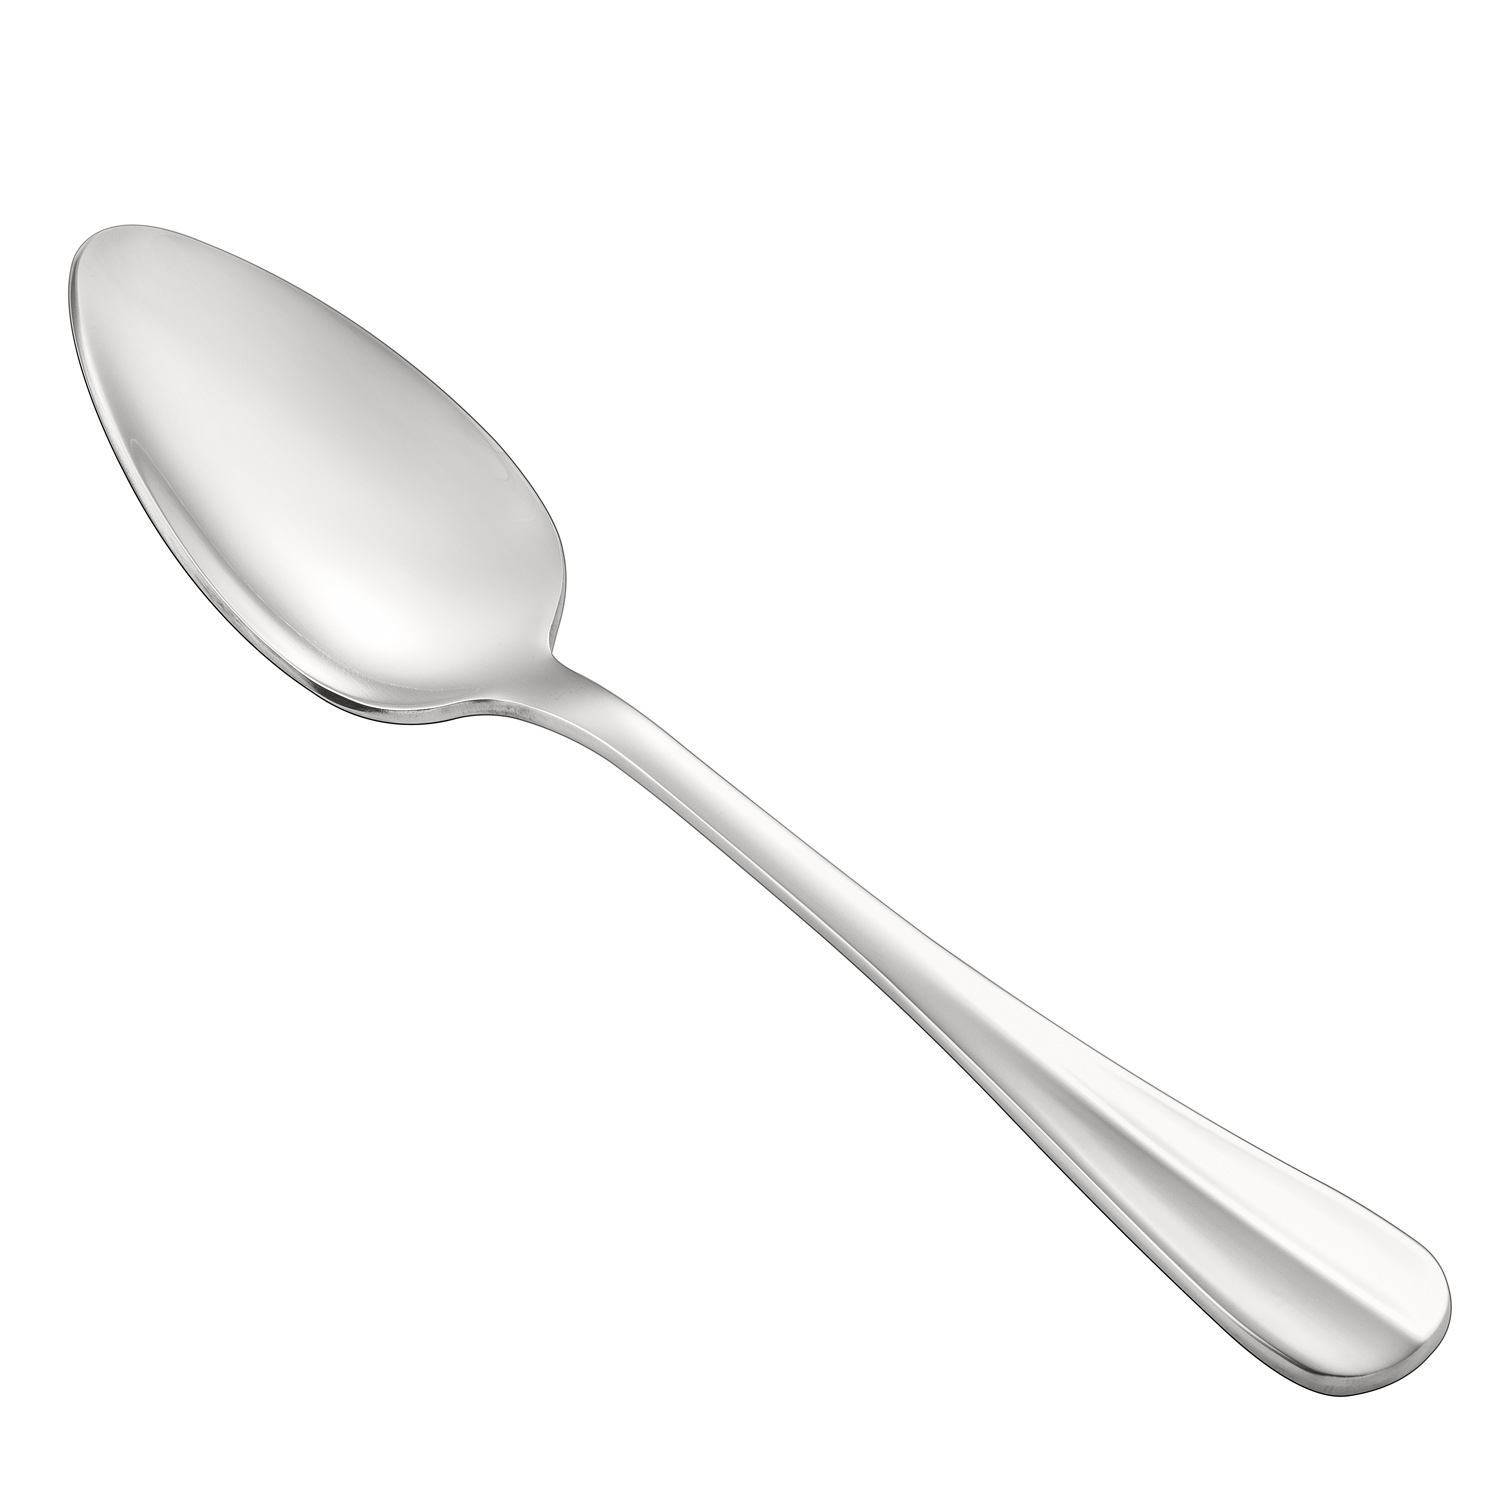 CAC China 8005-03 Exquisite Dinner Spoon, Extra Heavyweight 18/8, 7 1/8"